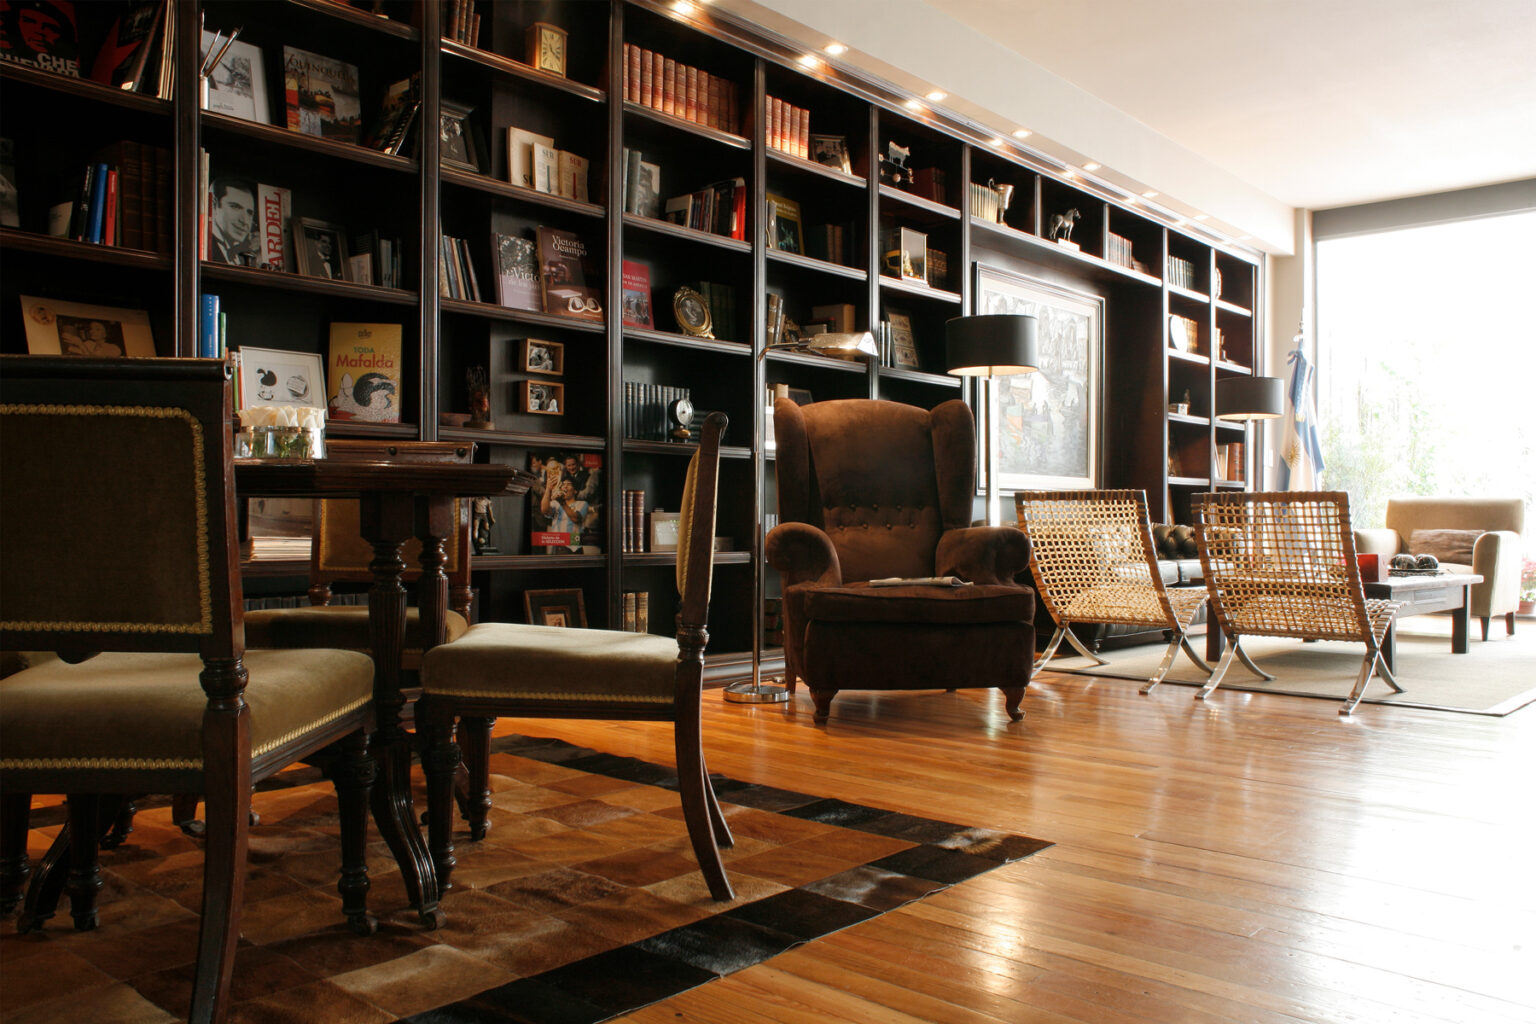 Hotel lobby with bookshelves and seating